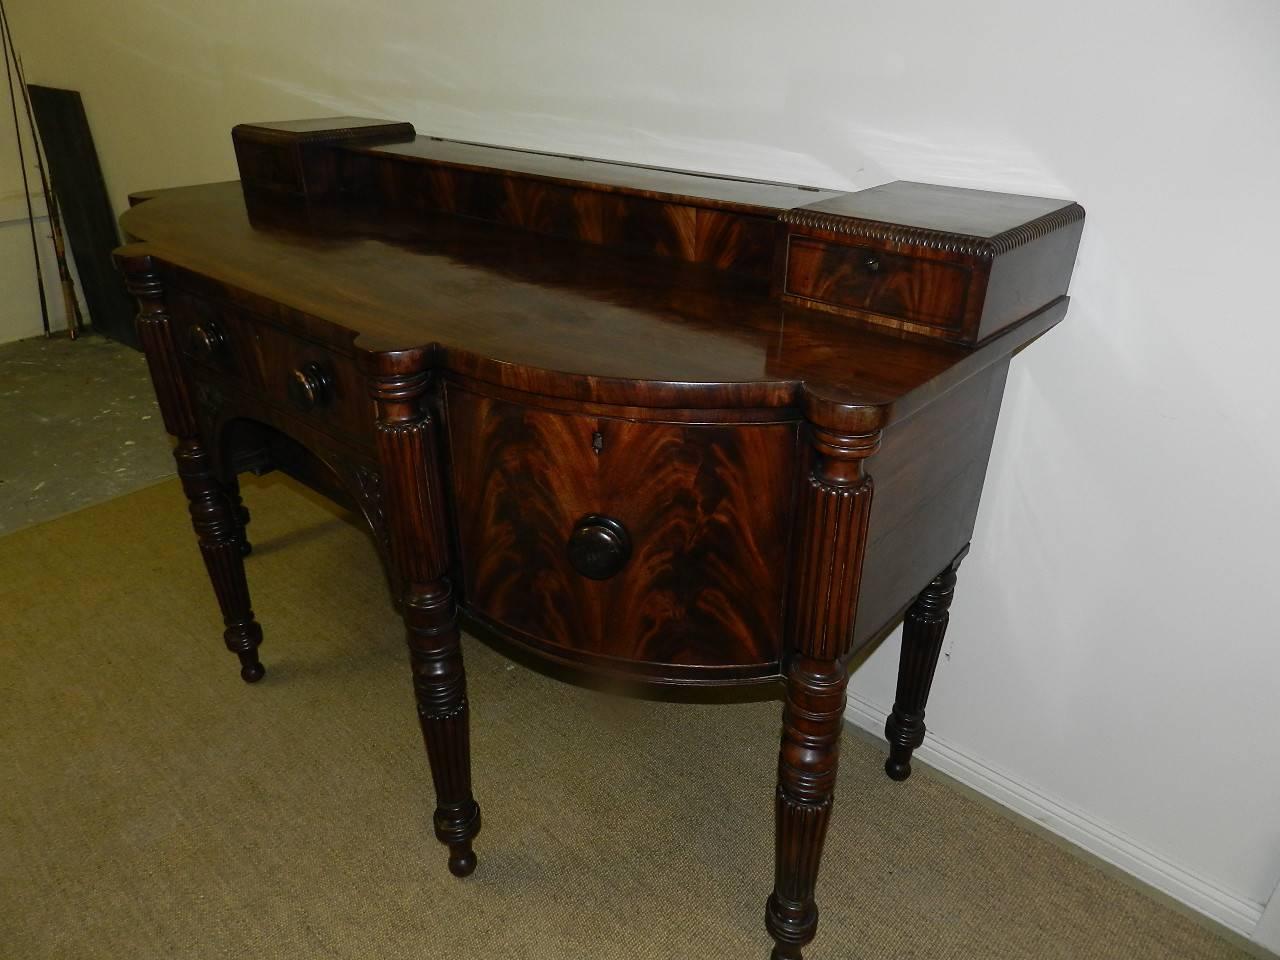 Stunning Scottish mahogany sideboard .Two central drawers, a deep wine drawer on the right and a cupboard on the left all have original knobs. The stage back has a baize lined lidded central cutlery storage area flanked by two small drawers. The